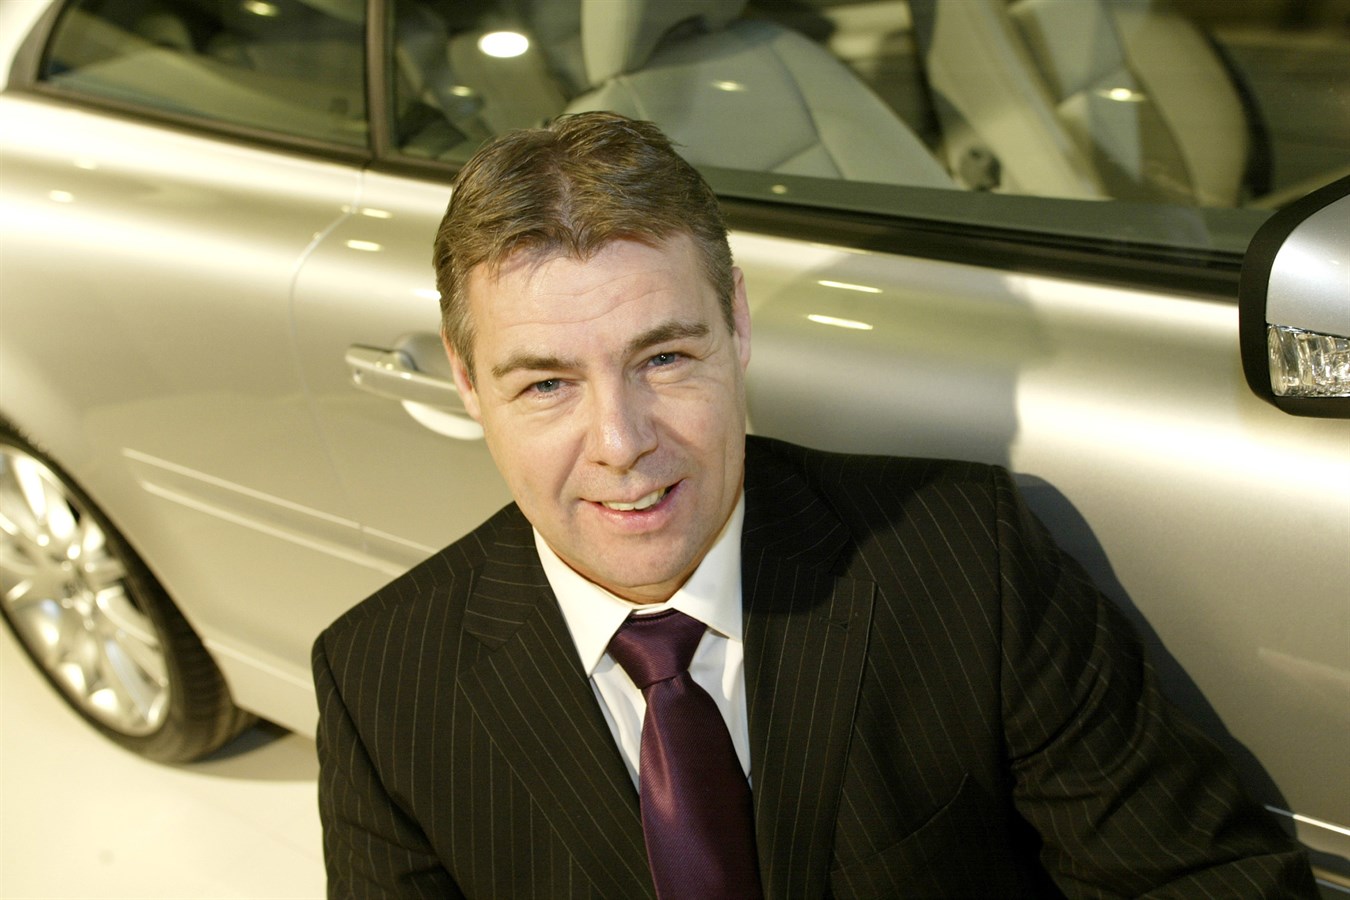 Albie van Buel, Senior Vice President for Purchasing, Volvo Car Corporation (1 March 2006). Resigned from Volvo Cars since 1st February 2008.